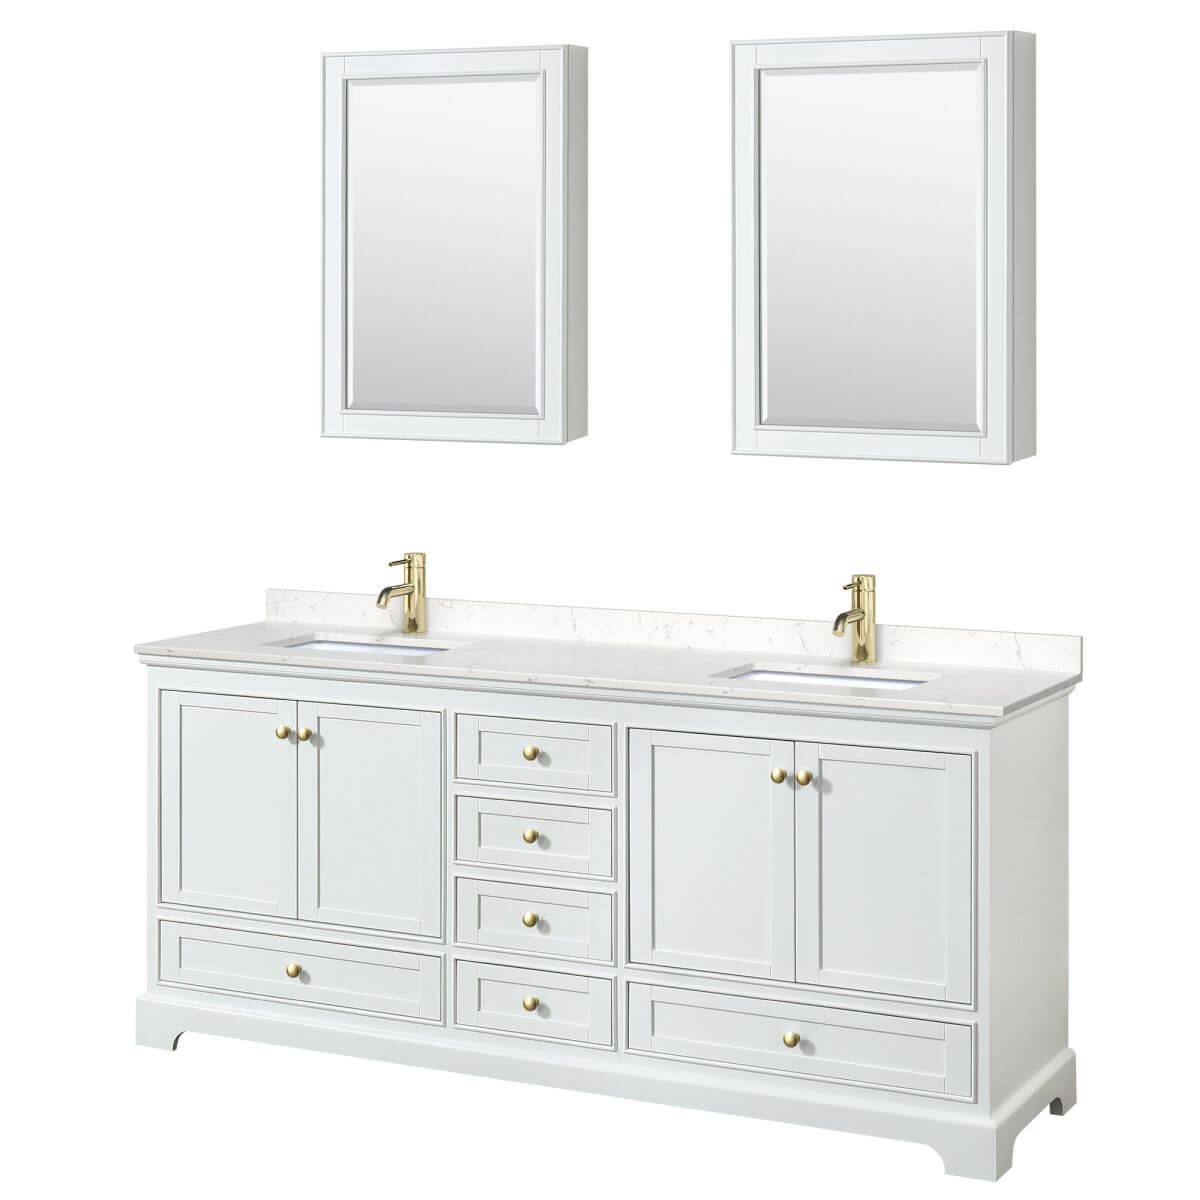 Wyndham Collection Deborah 80 inch Double Bathroom Vanity in White with Carrara Cultured Marble Countertop, Undermount Square Sinks, Brushed Gold Trim and Medicine Cabinets - WCS202080DWGC2UNSMED